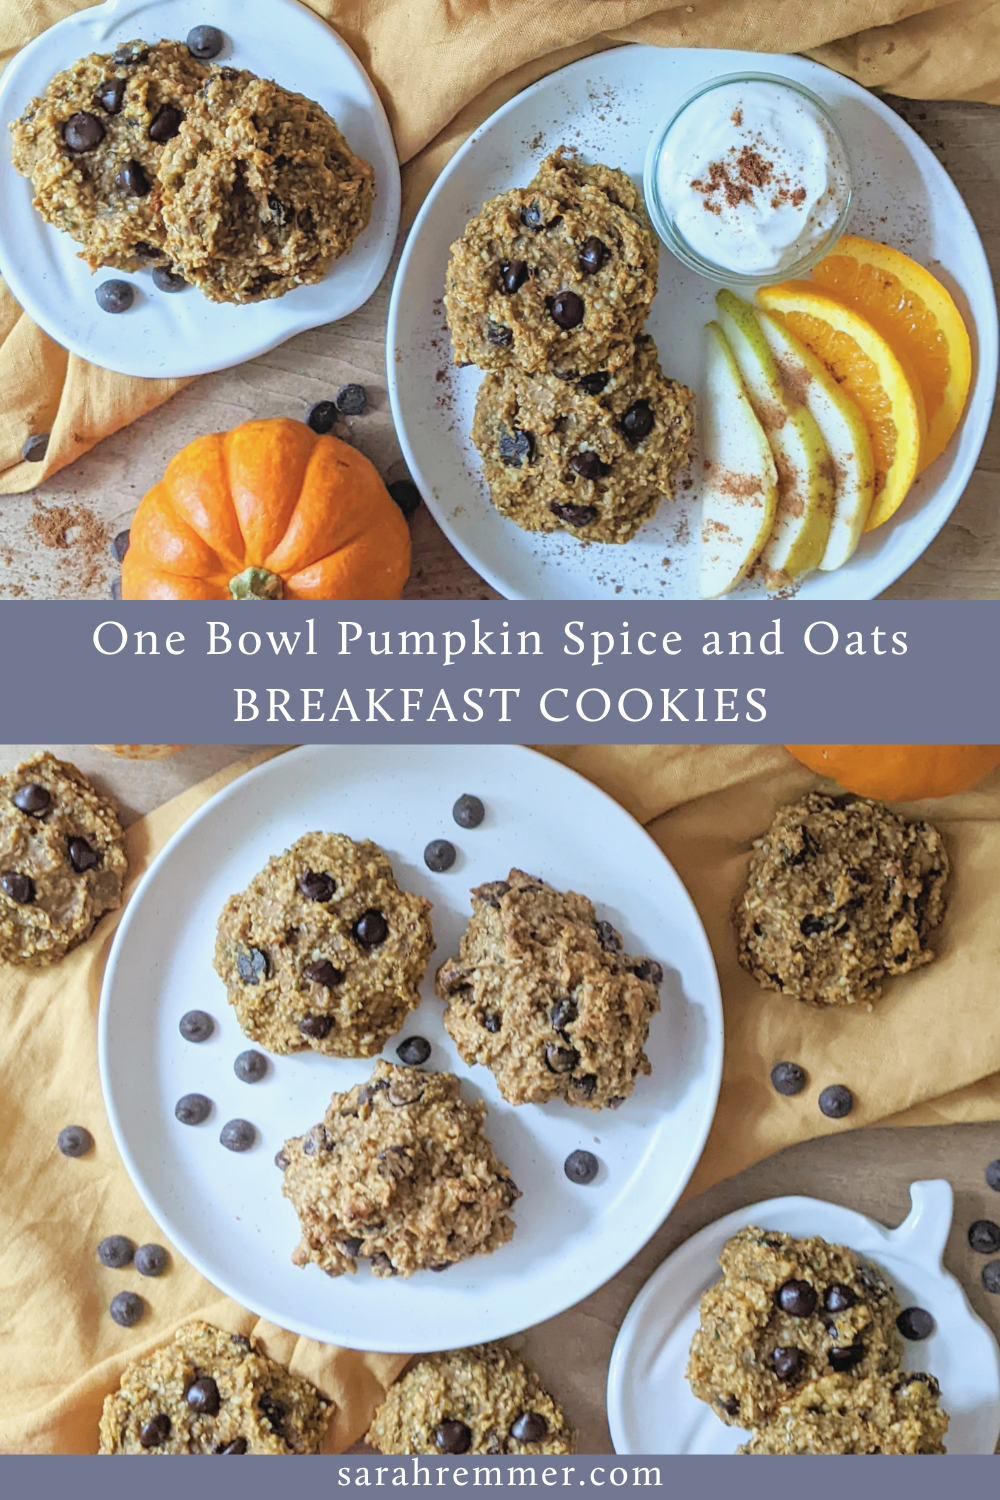 The most satiating, delectable and kid-approved pumpkin spice breakfast cookie! They are a nutritious and balanced start to your day.